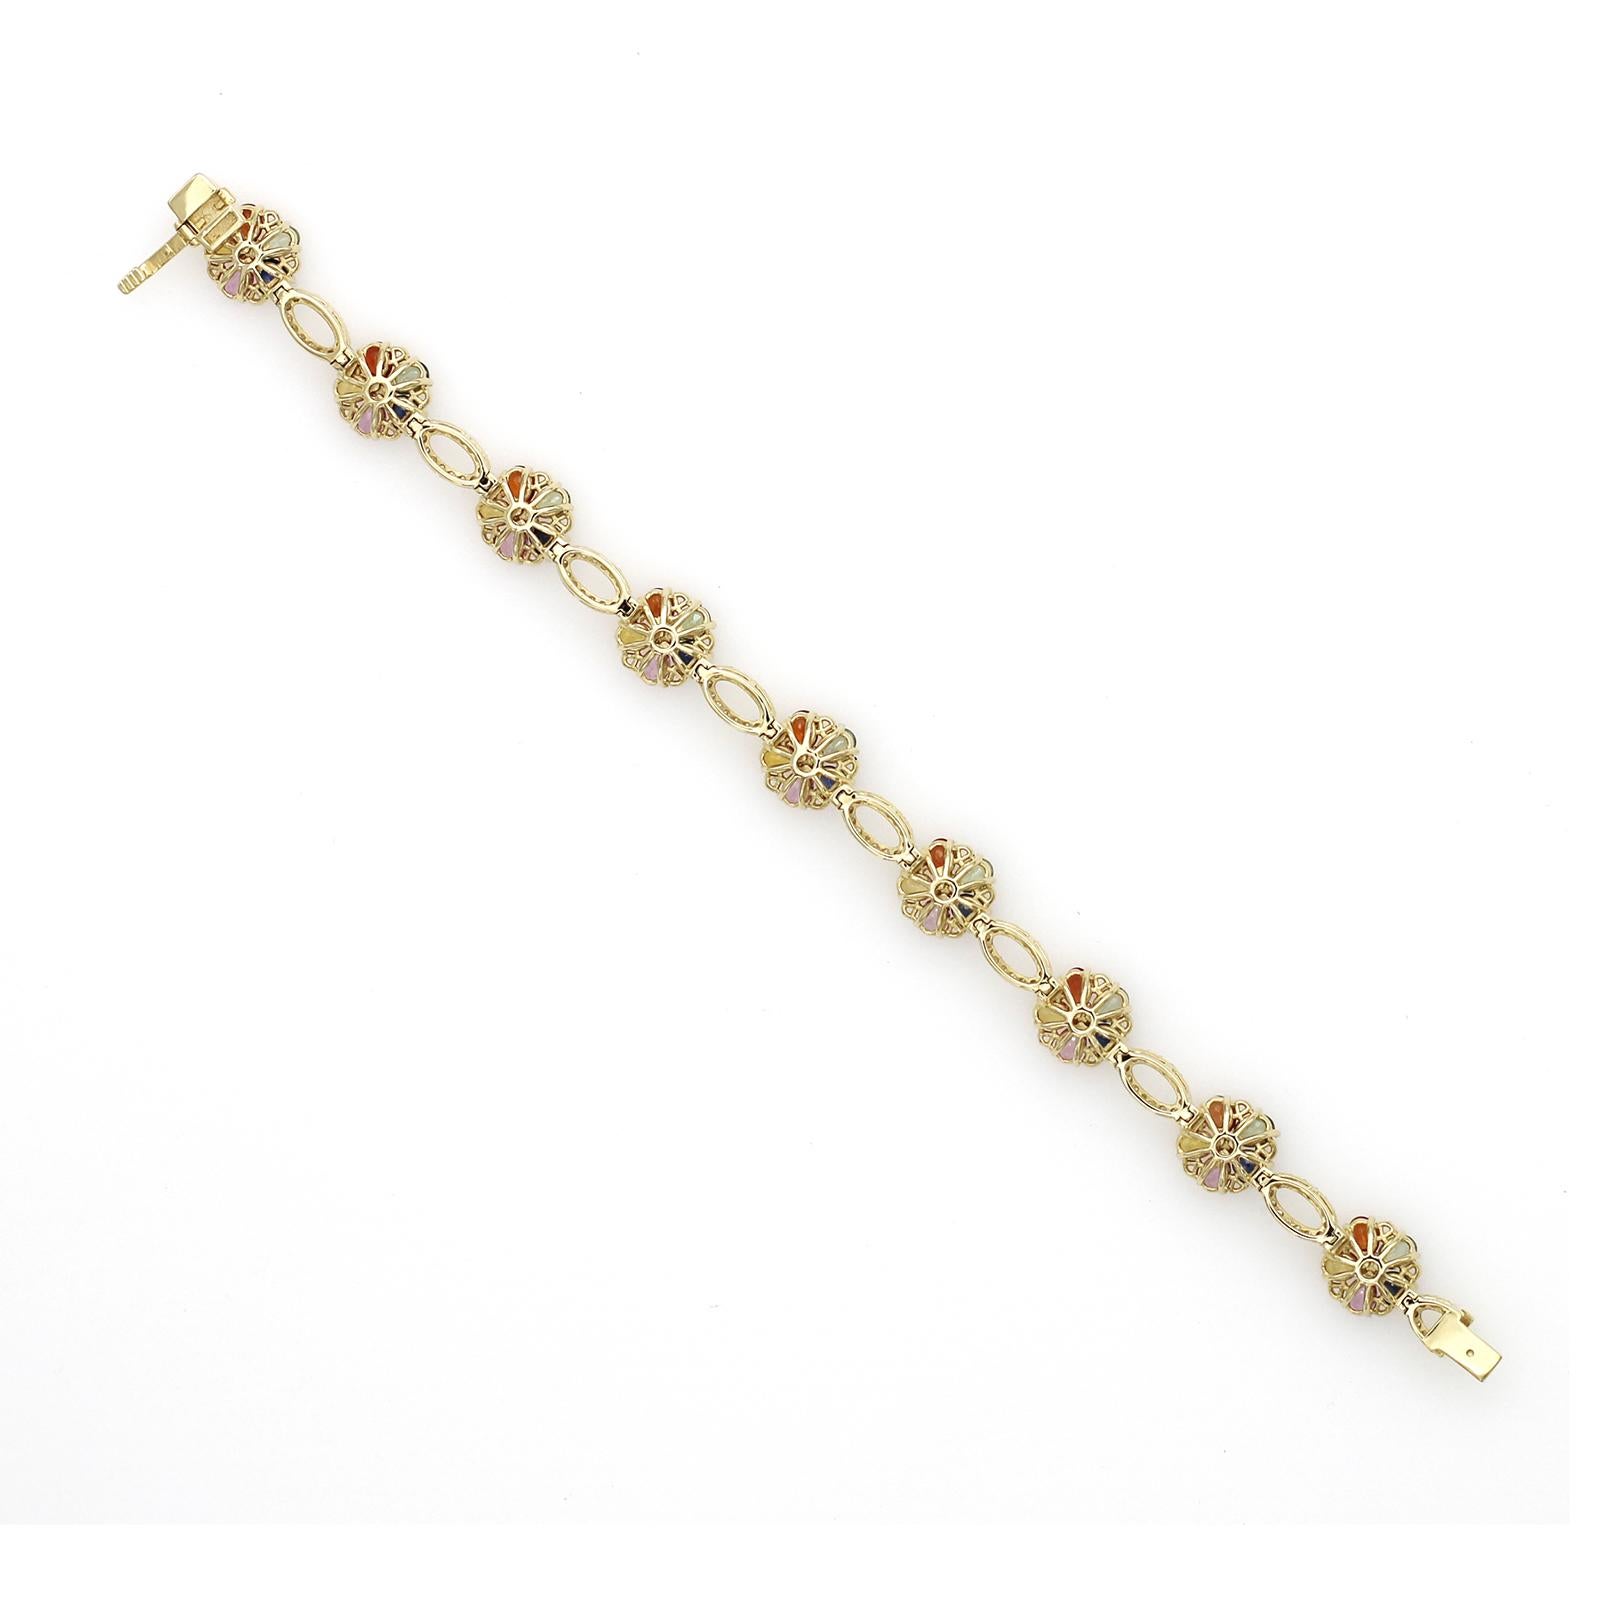 7.65 CT Multicolor Sapphires 0.85CT Diamonds in 14K Gold Flower Bracelet In Excellent Condition For Sale In Los Angeles, CA